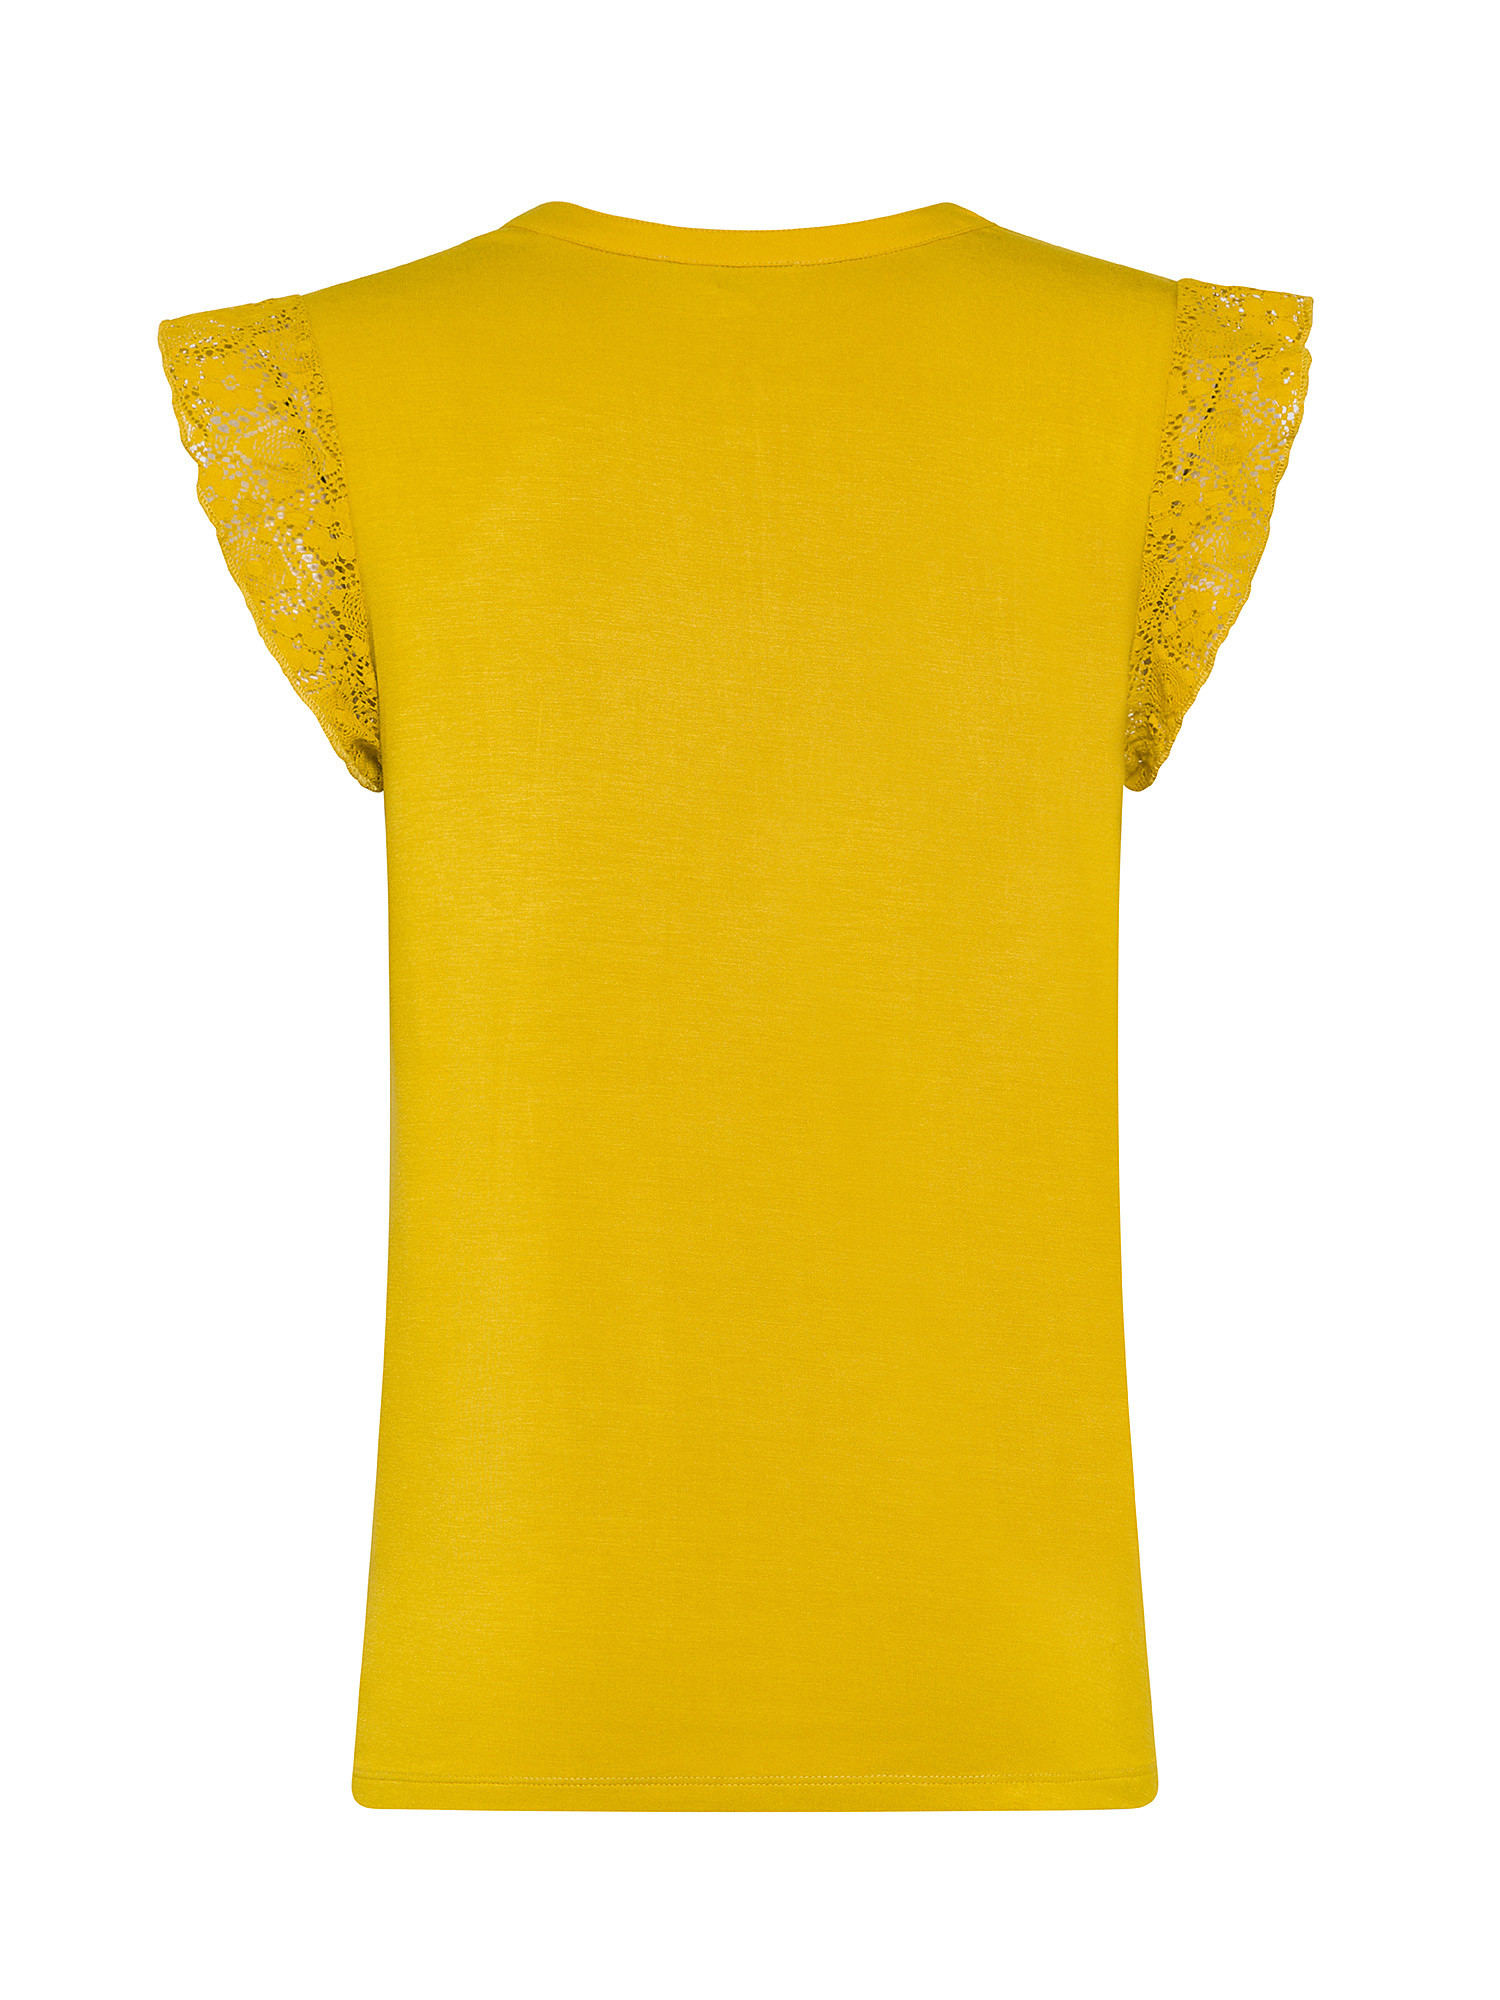 Koan - T-shirt con inserti in pizzo, Giallo, large image number 1